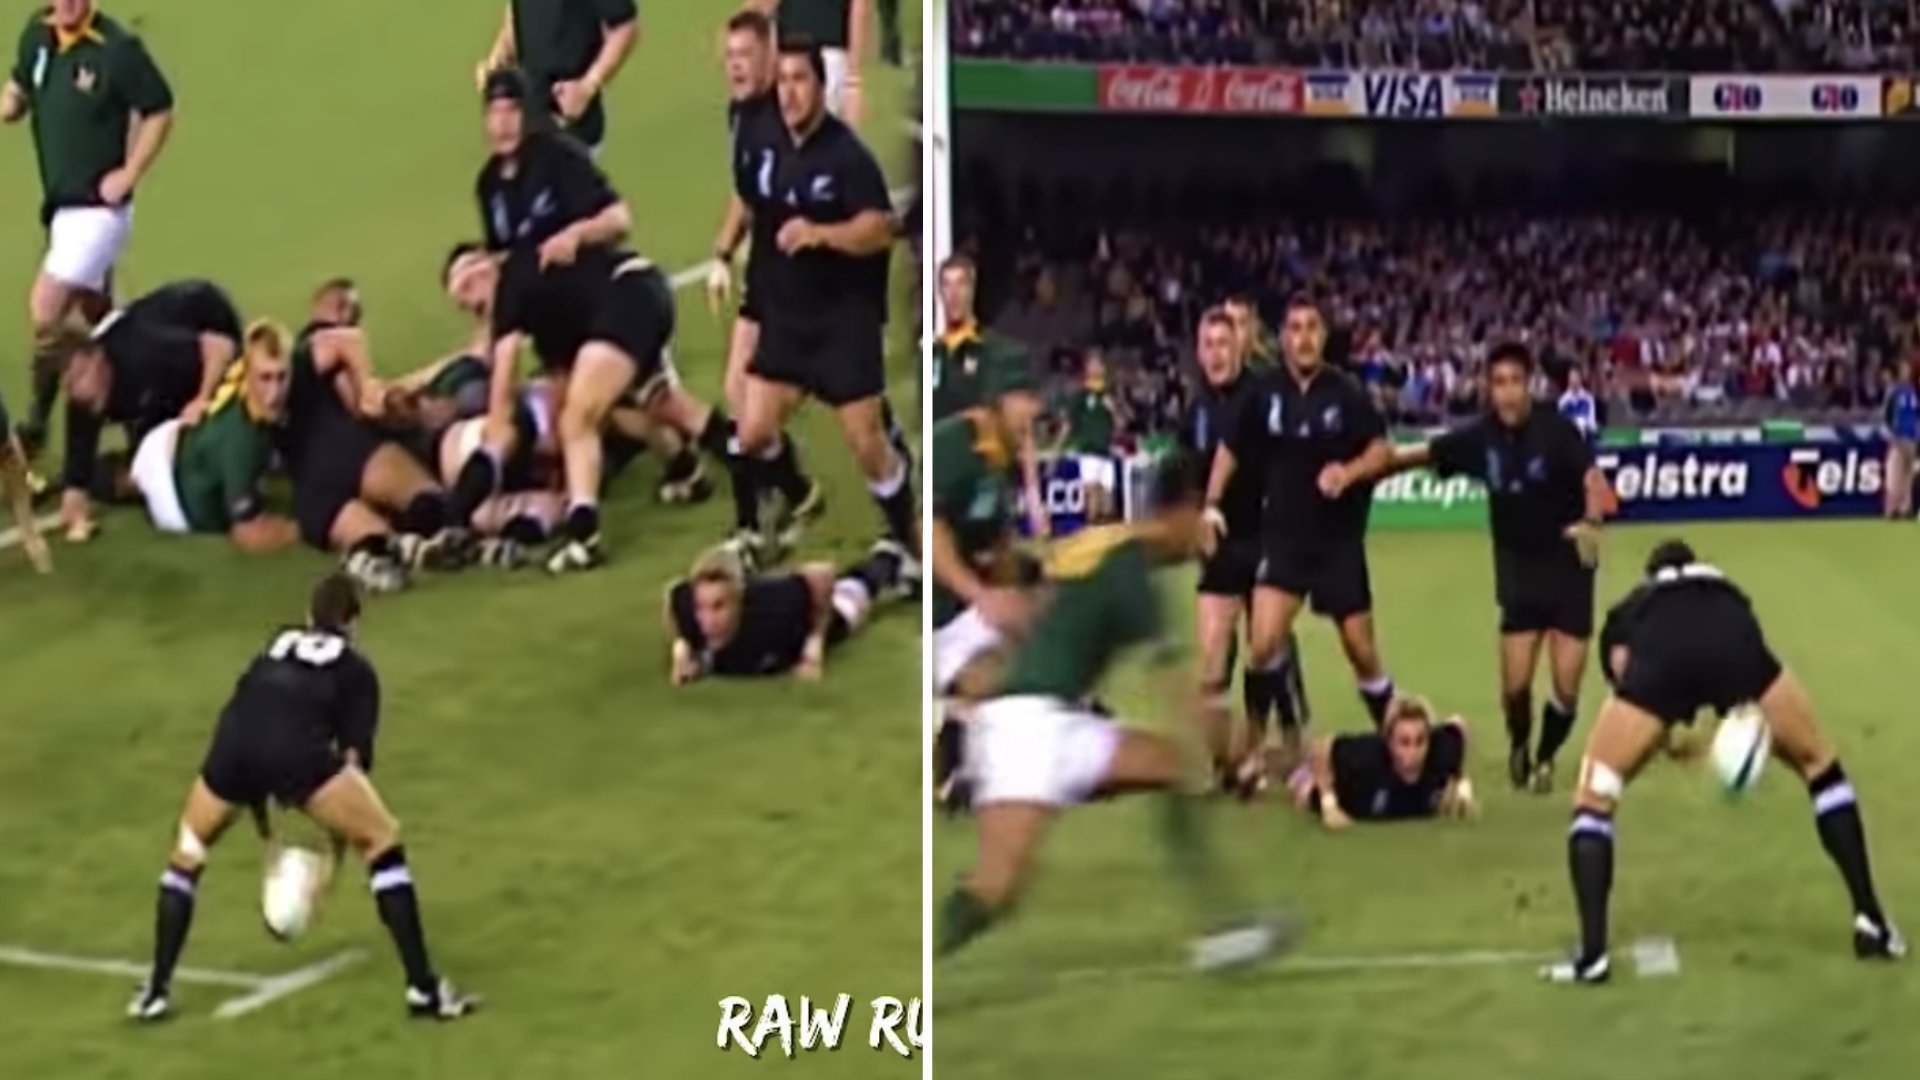 RAW RUGBY: A video has been made on the best "through the leg" passes ever and you will have to watch it alone